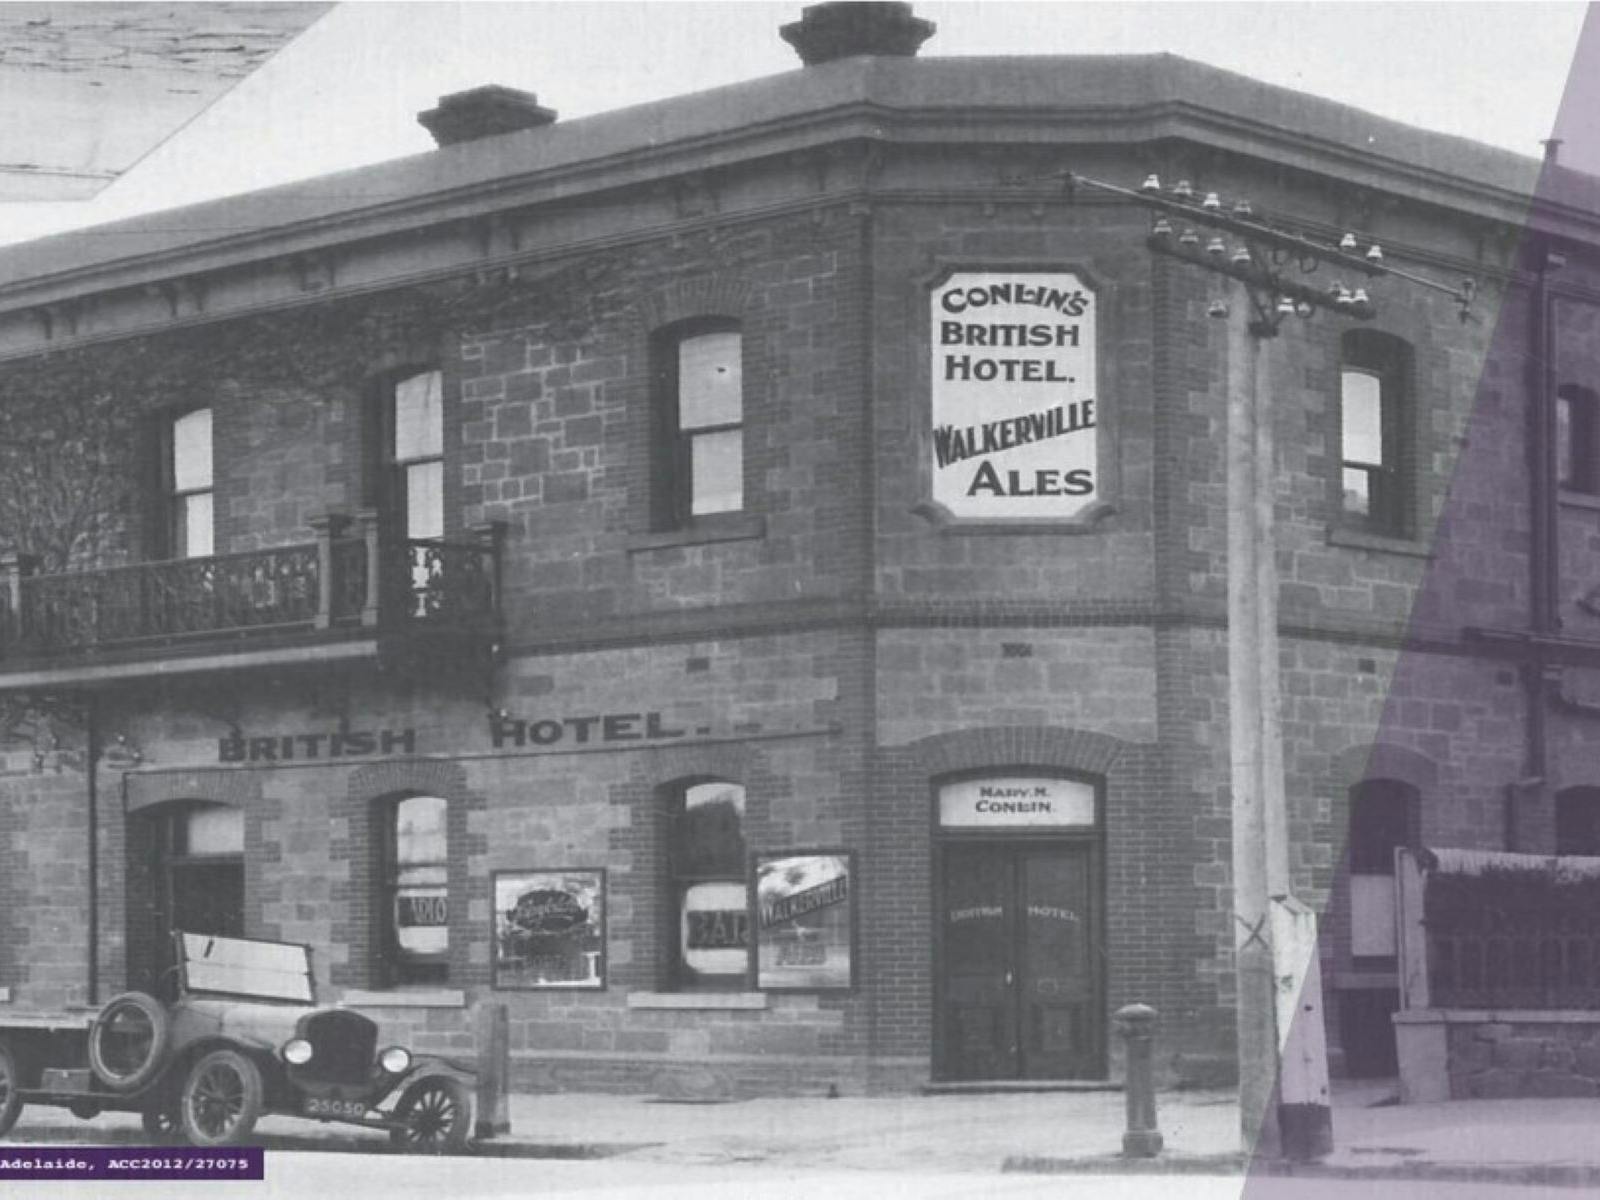 Cheers! | Celebrating the Old Pubs of North Adelaide Slider Image 1